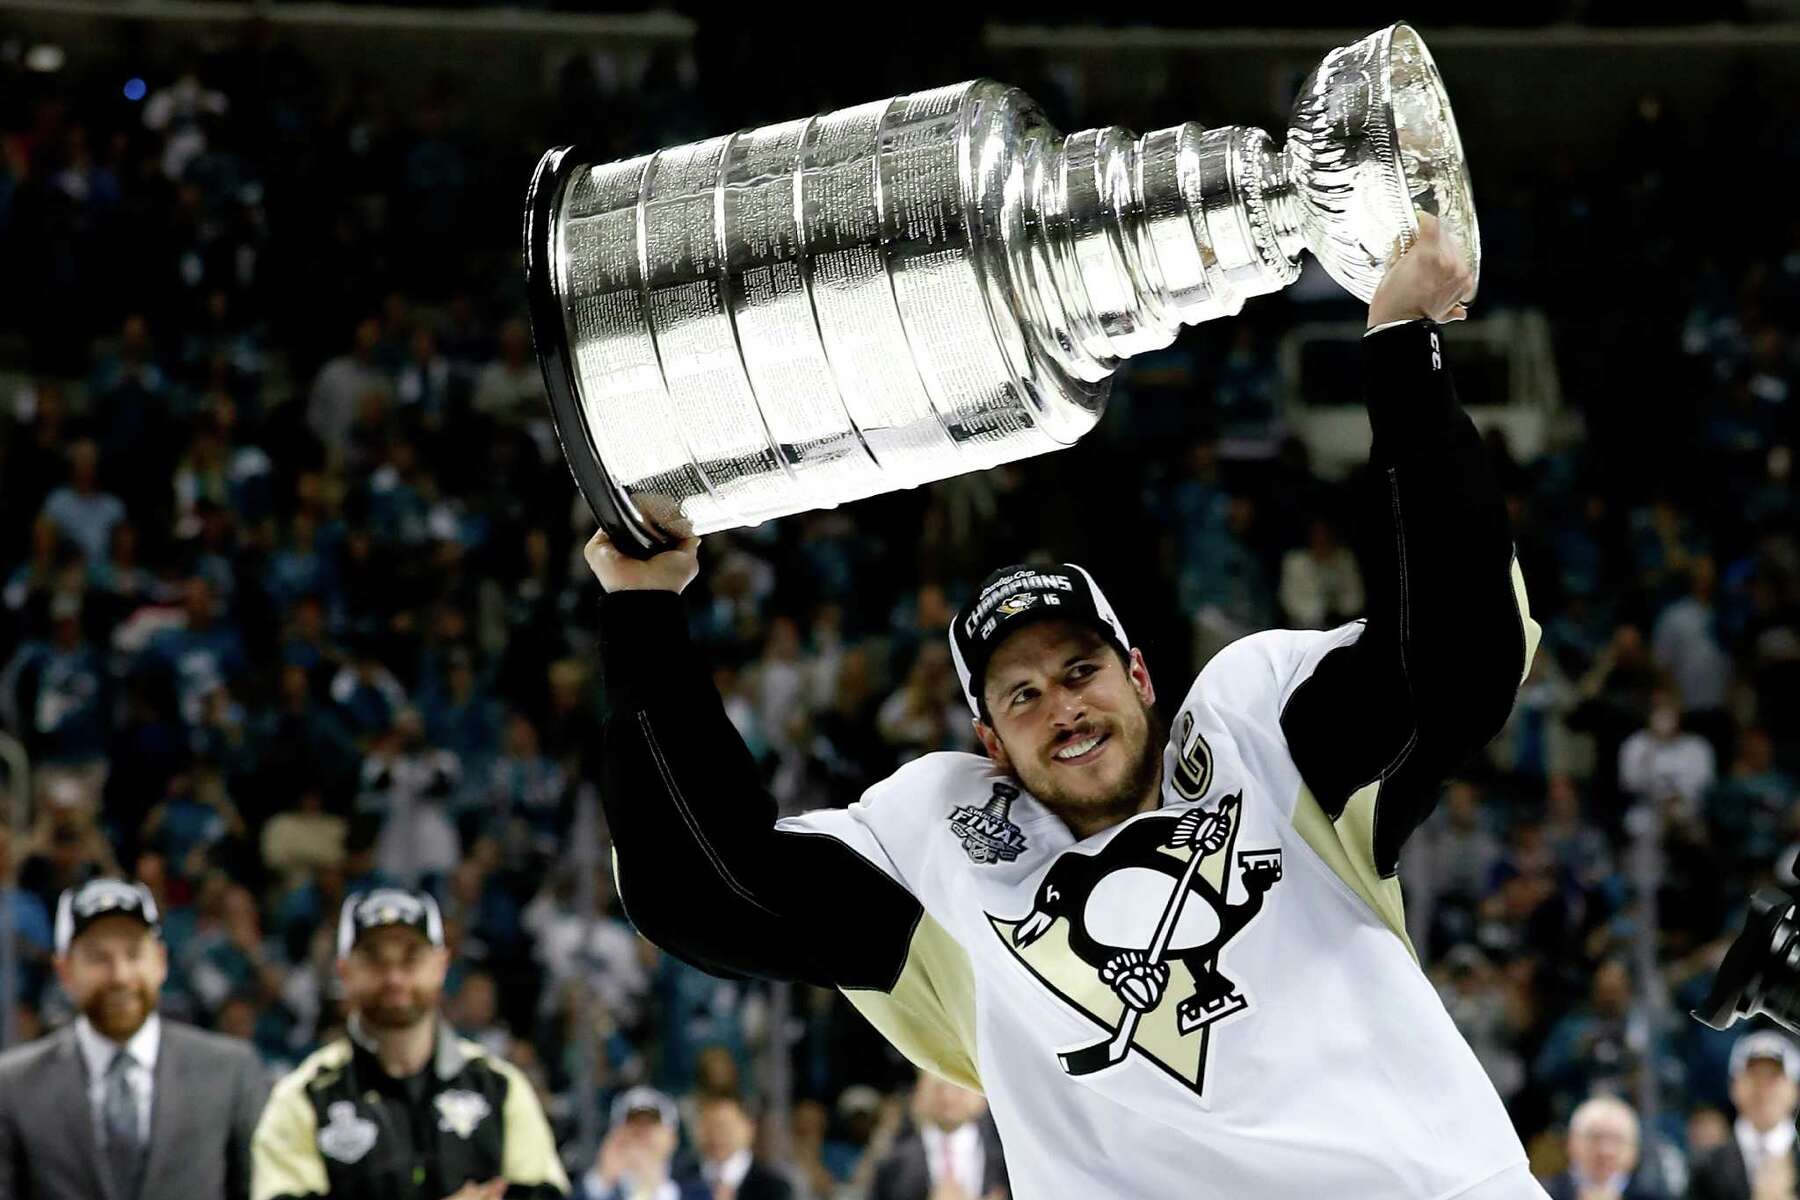 How to watch the Stanley Cup Finals without cable